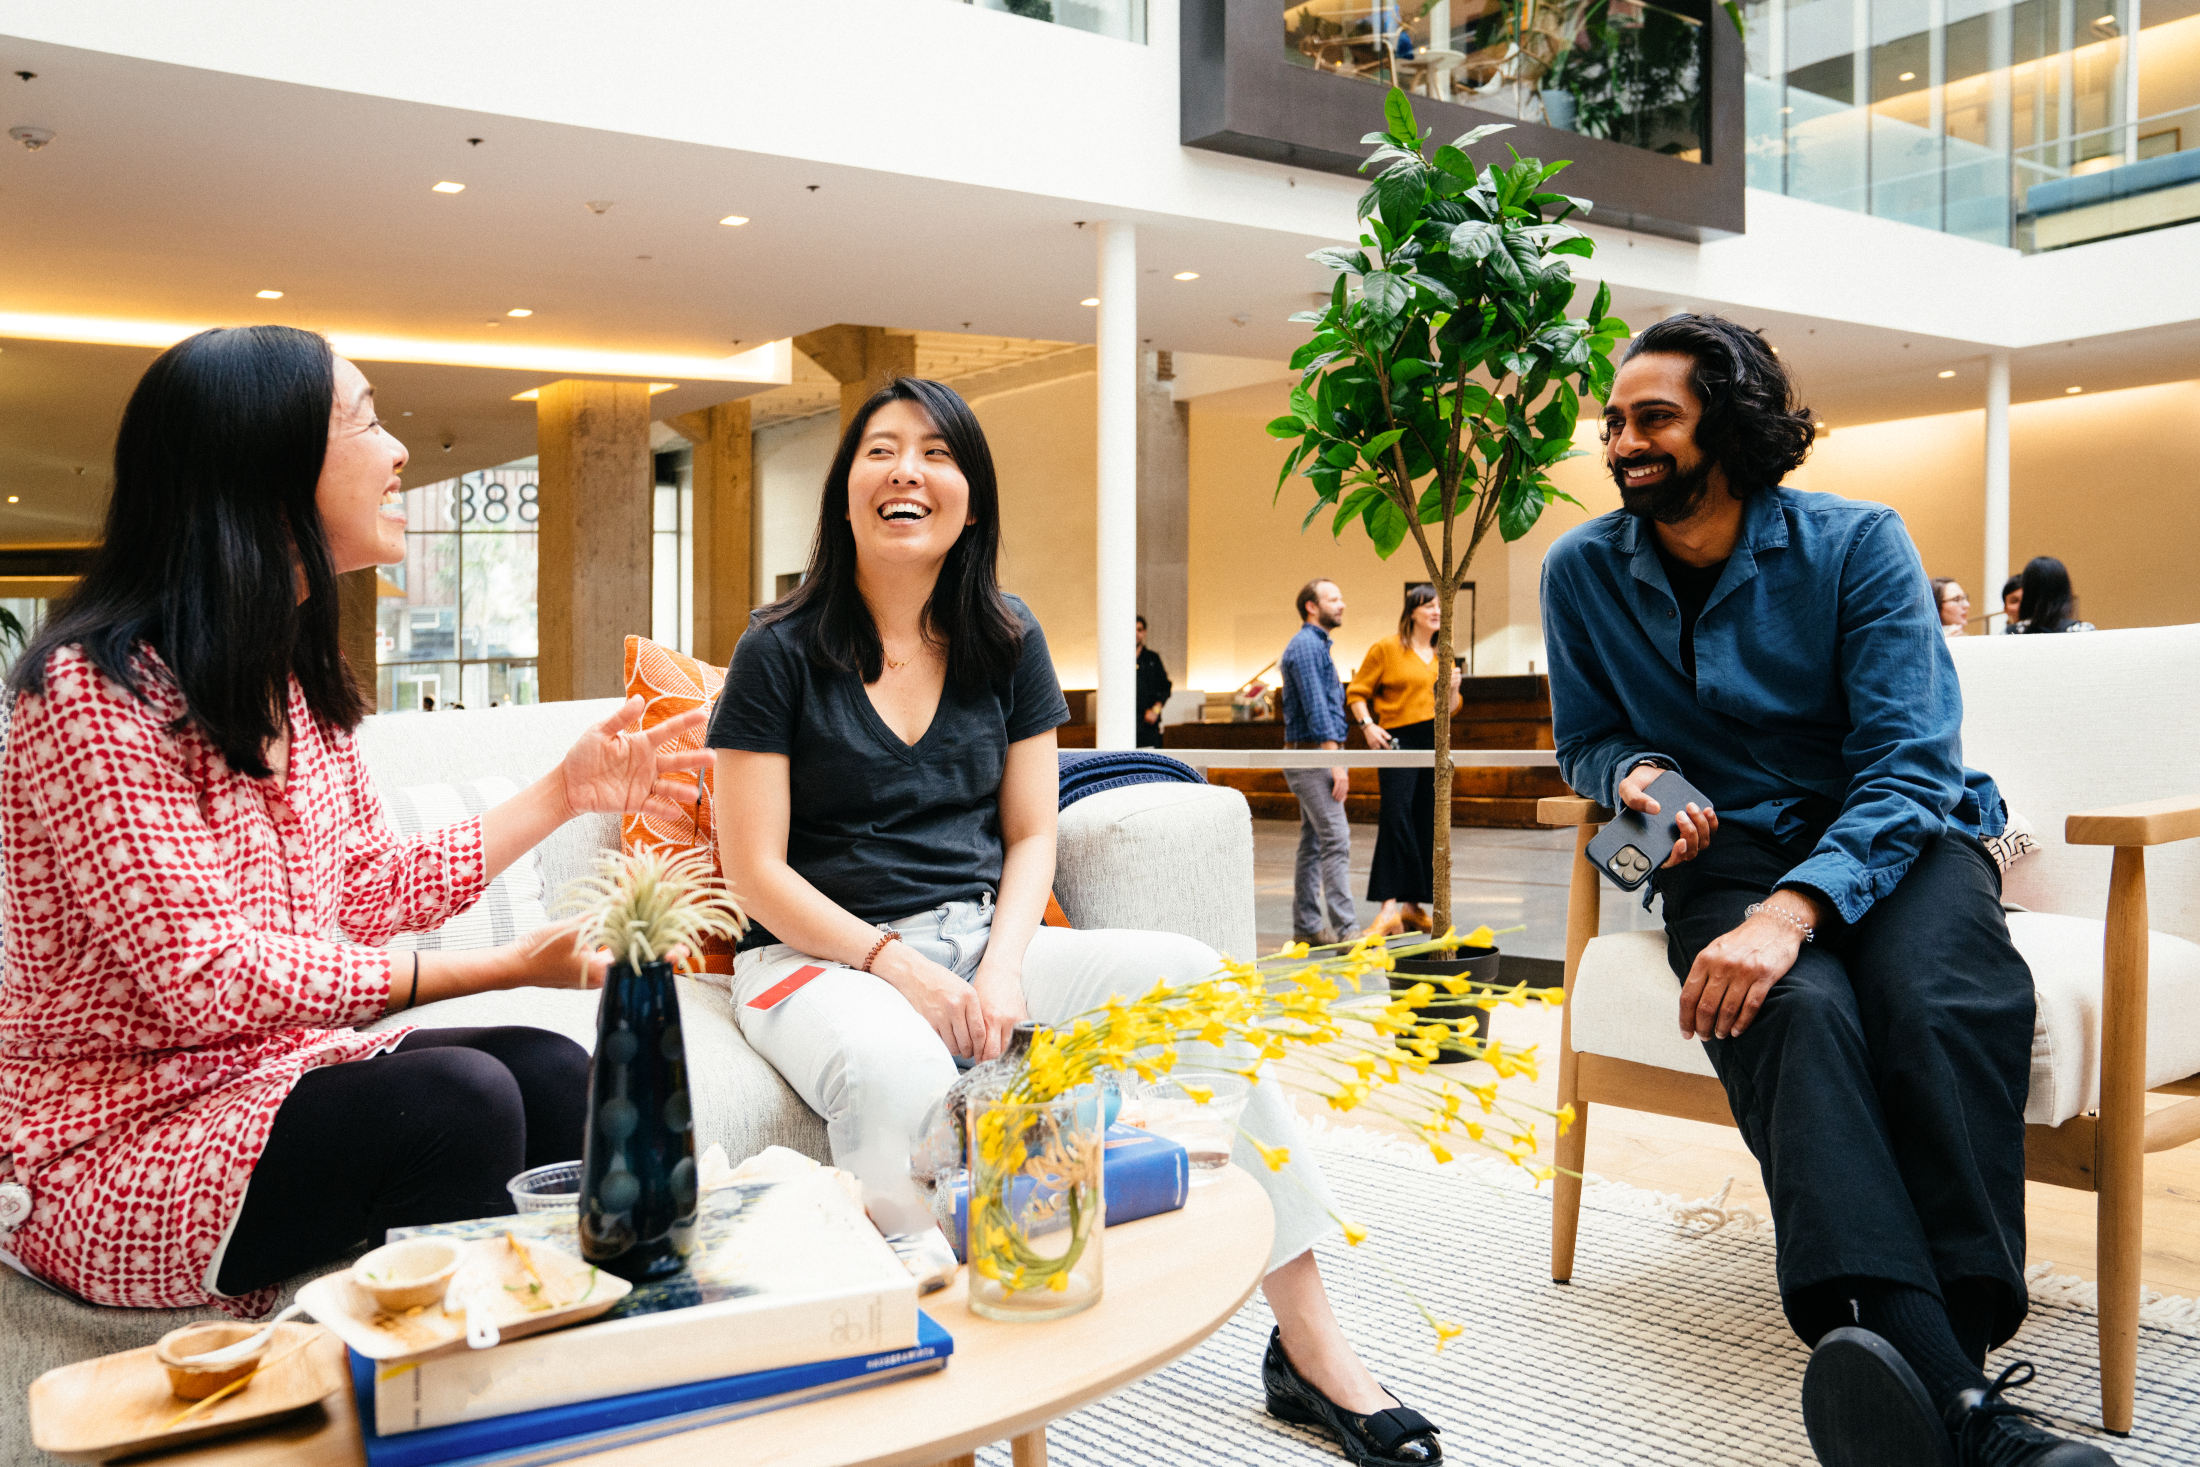 Three employees engaged in lively conversation while seated around a coffee table in the office atrium.